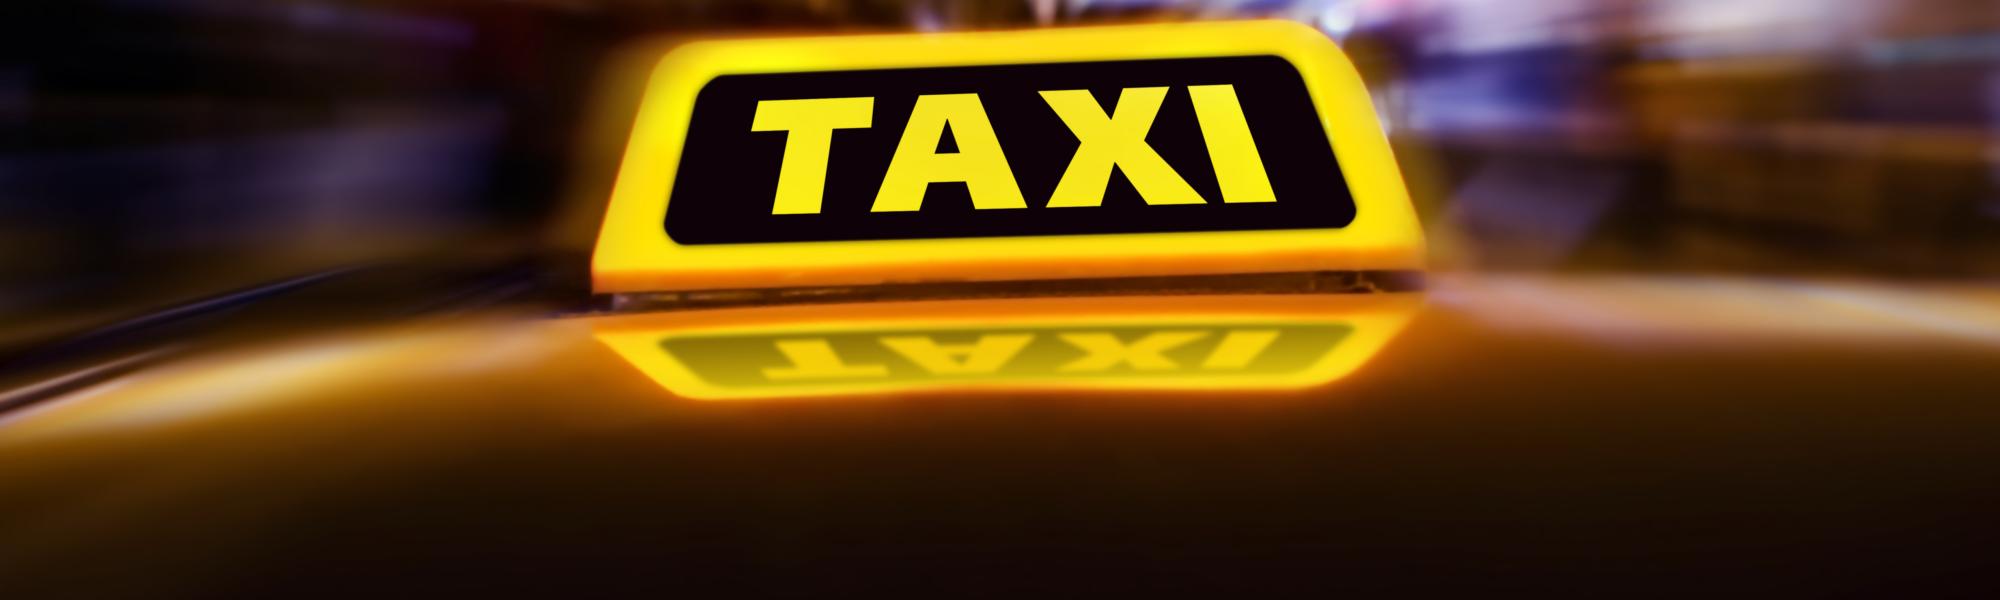 Taxi_sign_on_the_roof_of_car_on_the_street_at_night